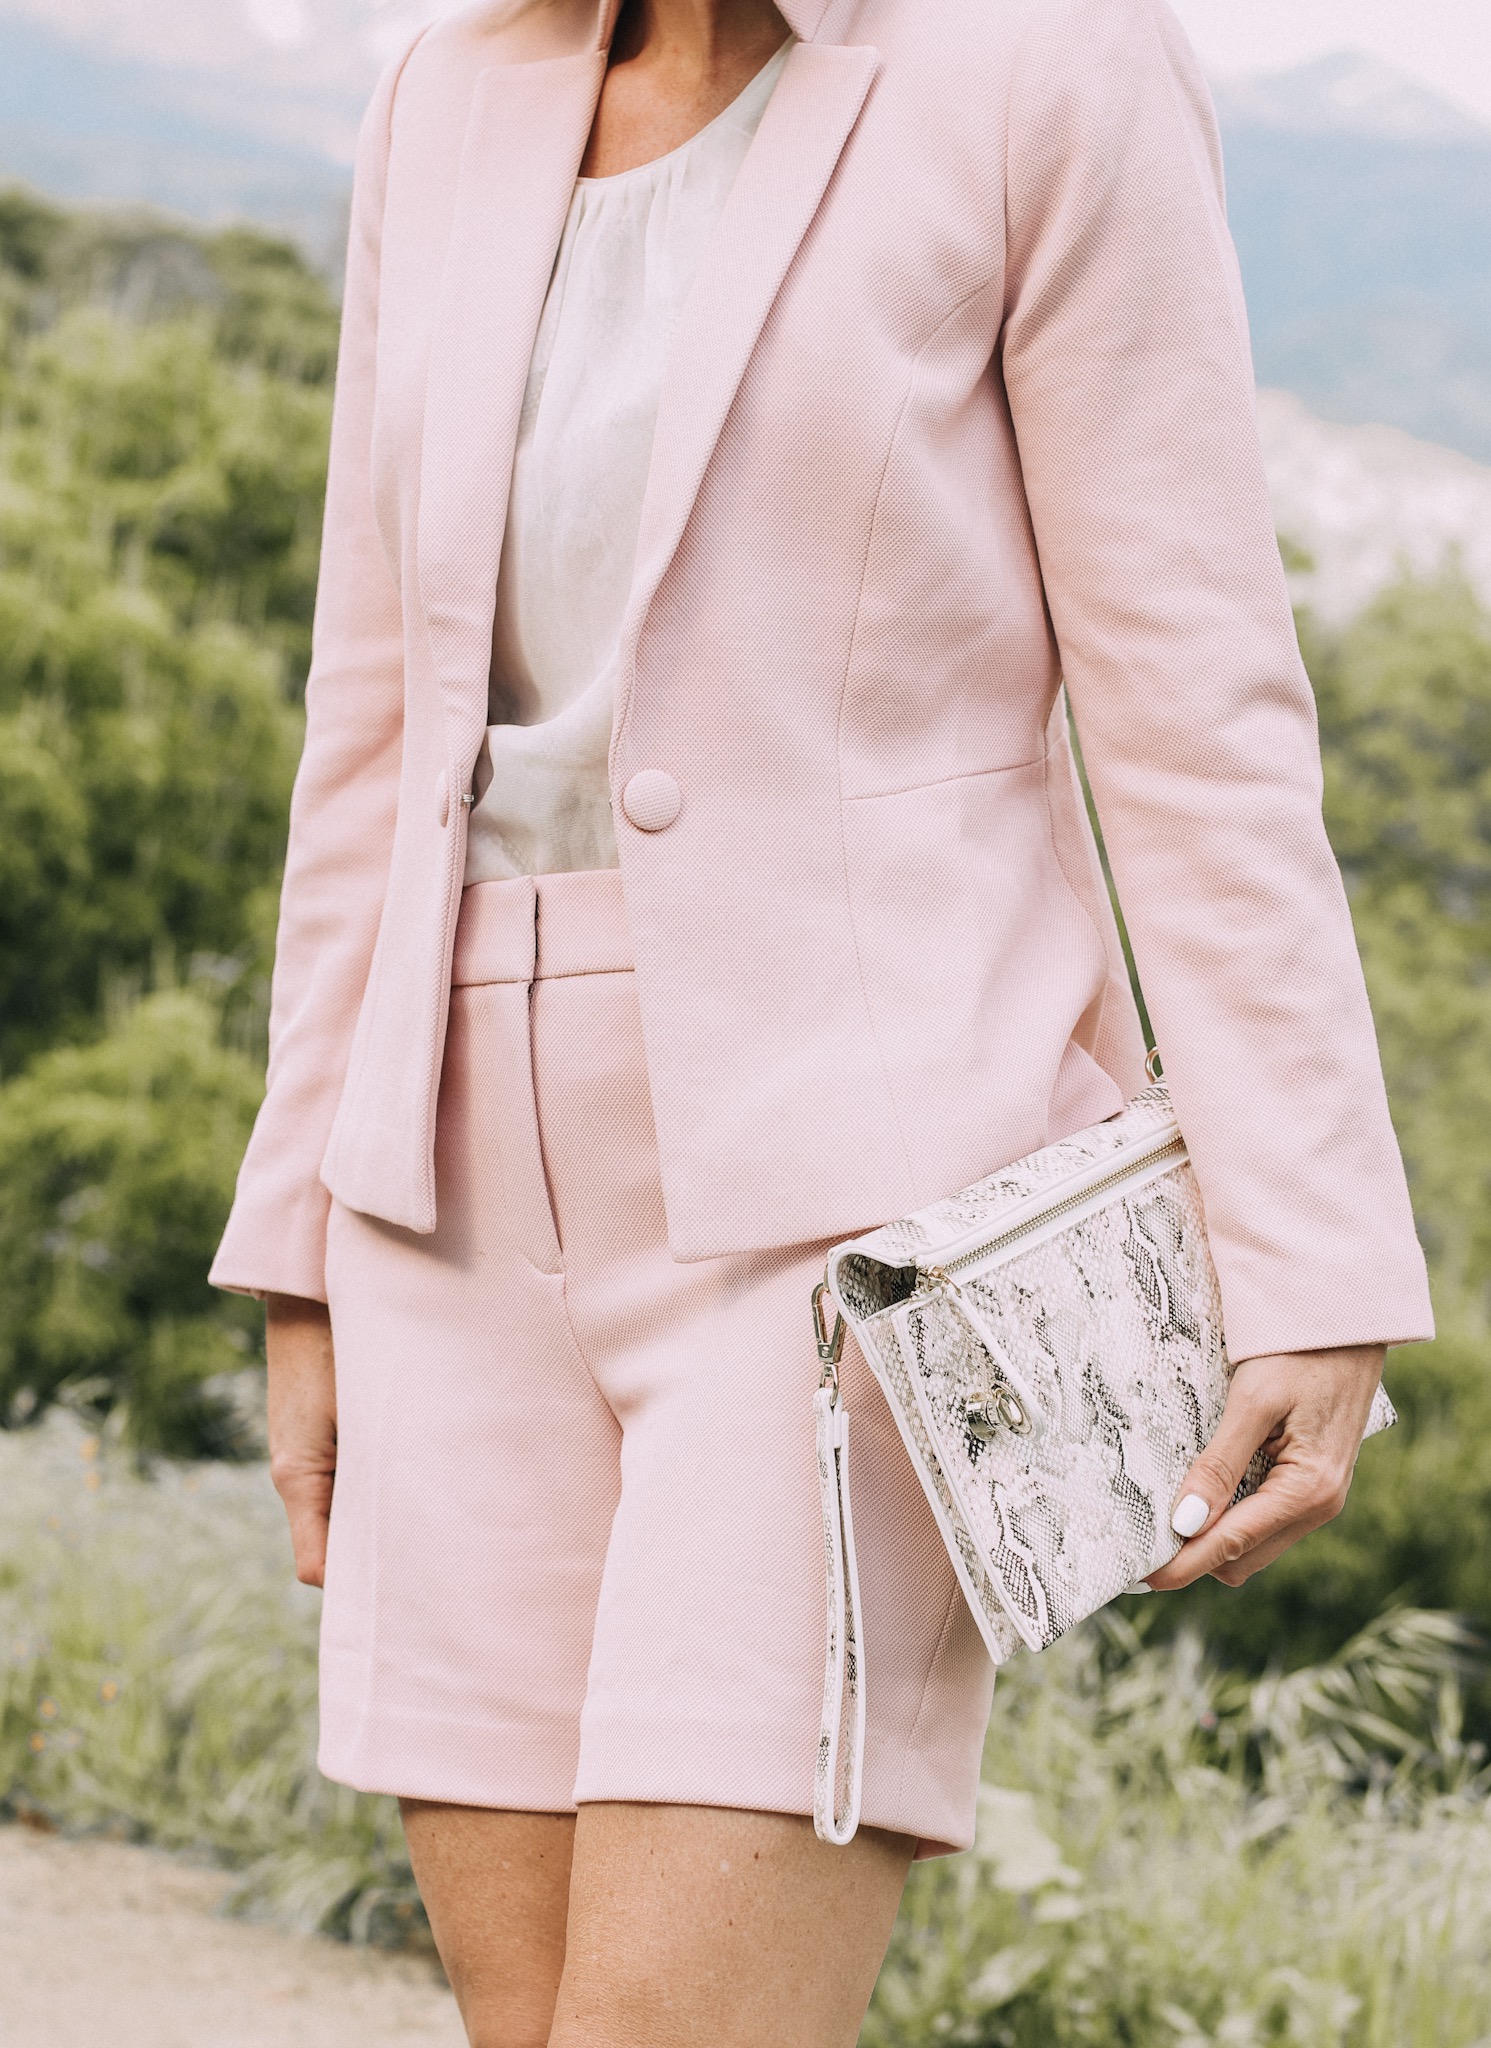 Spring Office Outfits, Fashion blogger Erin Busbee of BusbeeStyle.com wearing matching pink shorts and blazer with pink snake print heels and clutch from White House Black Market in Sequoia National Park